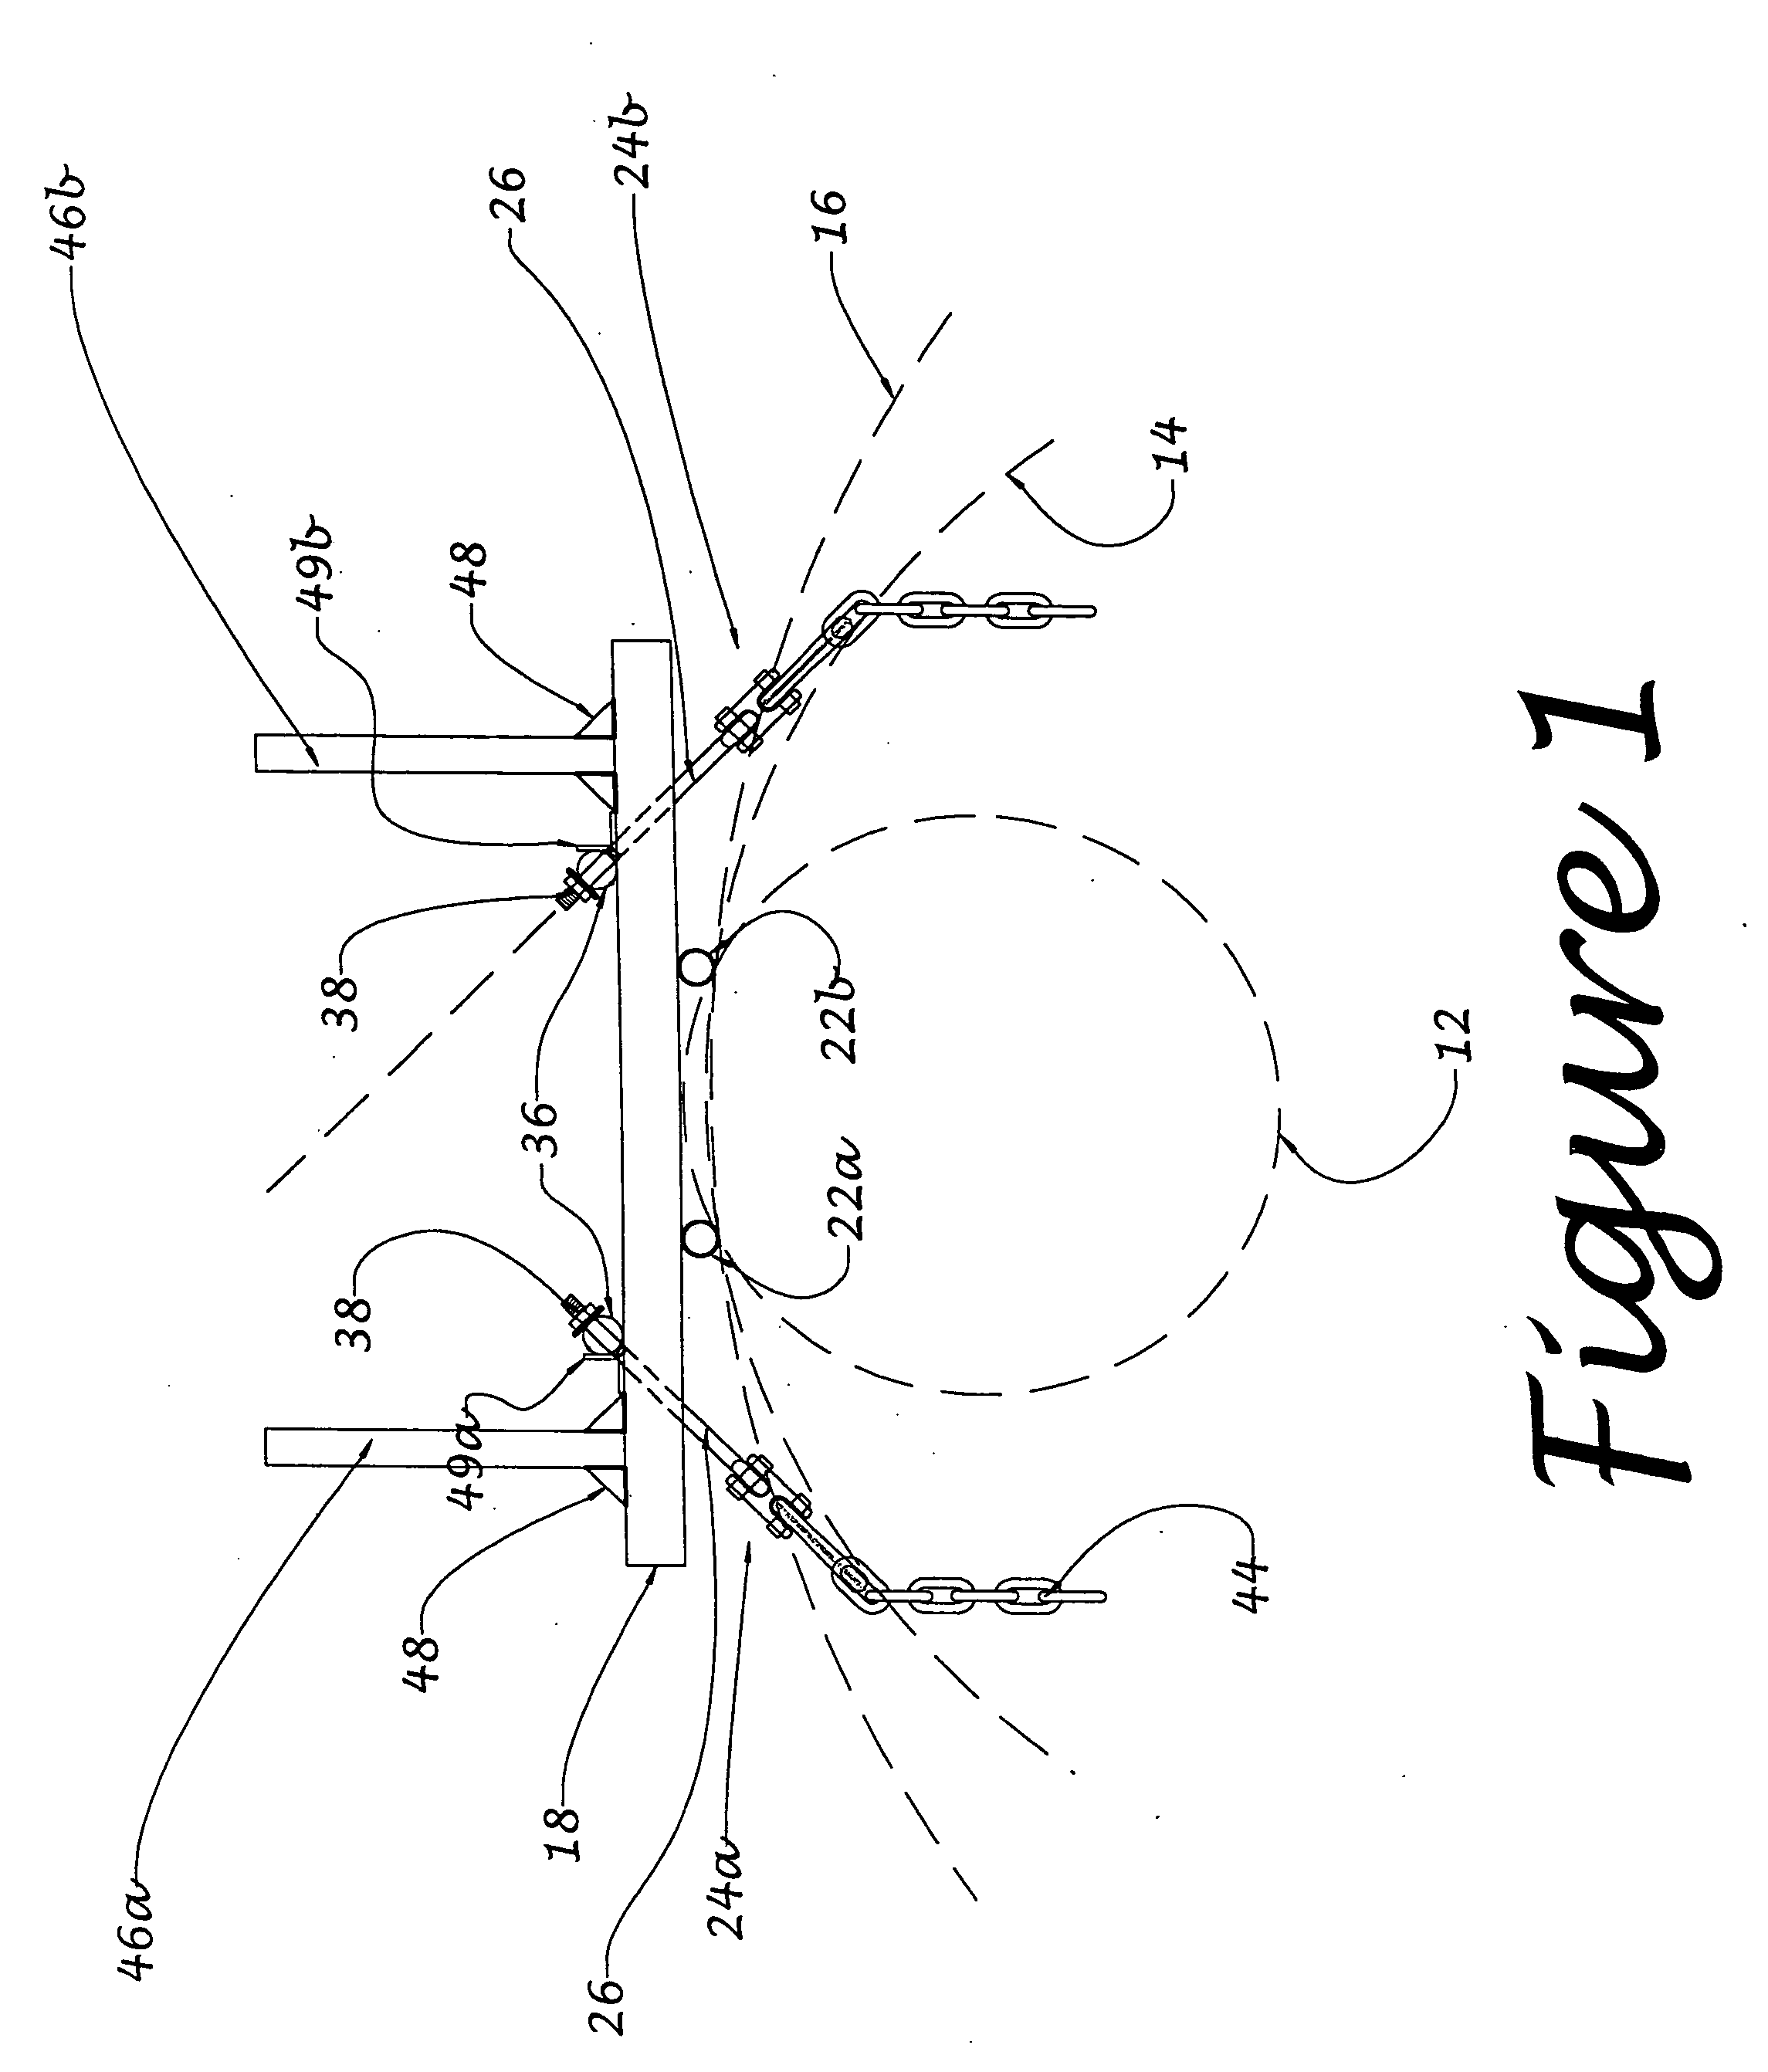 Clamp device for securement of scaffolding to large-girth structures